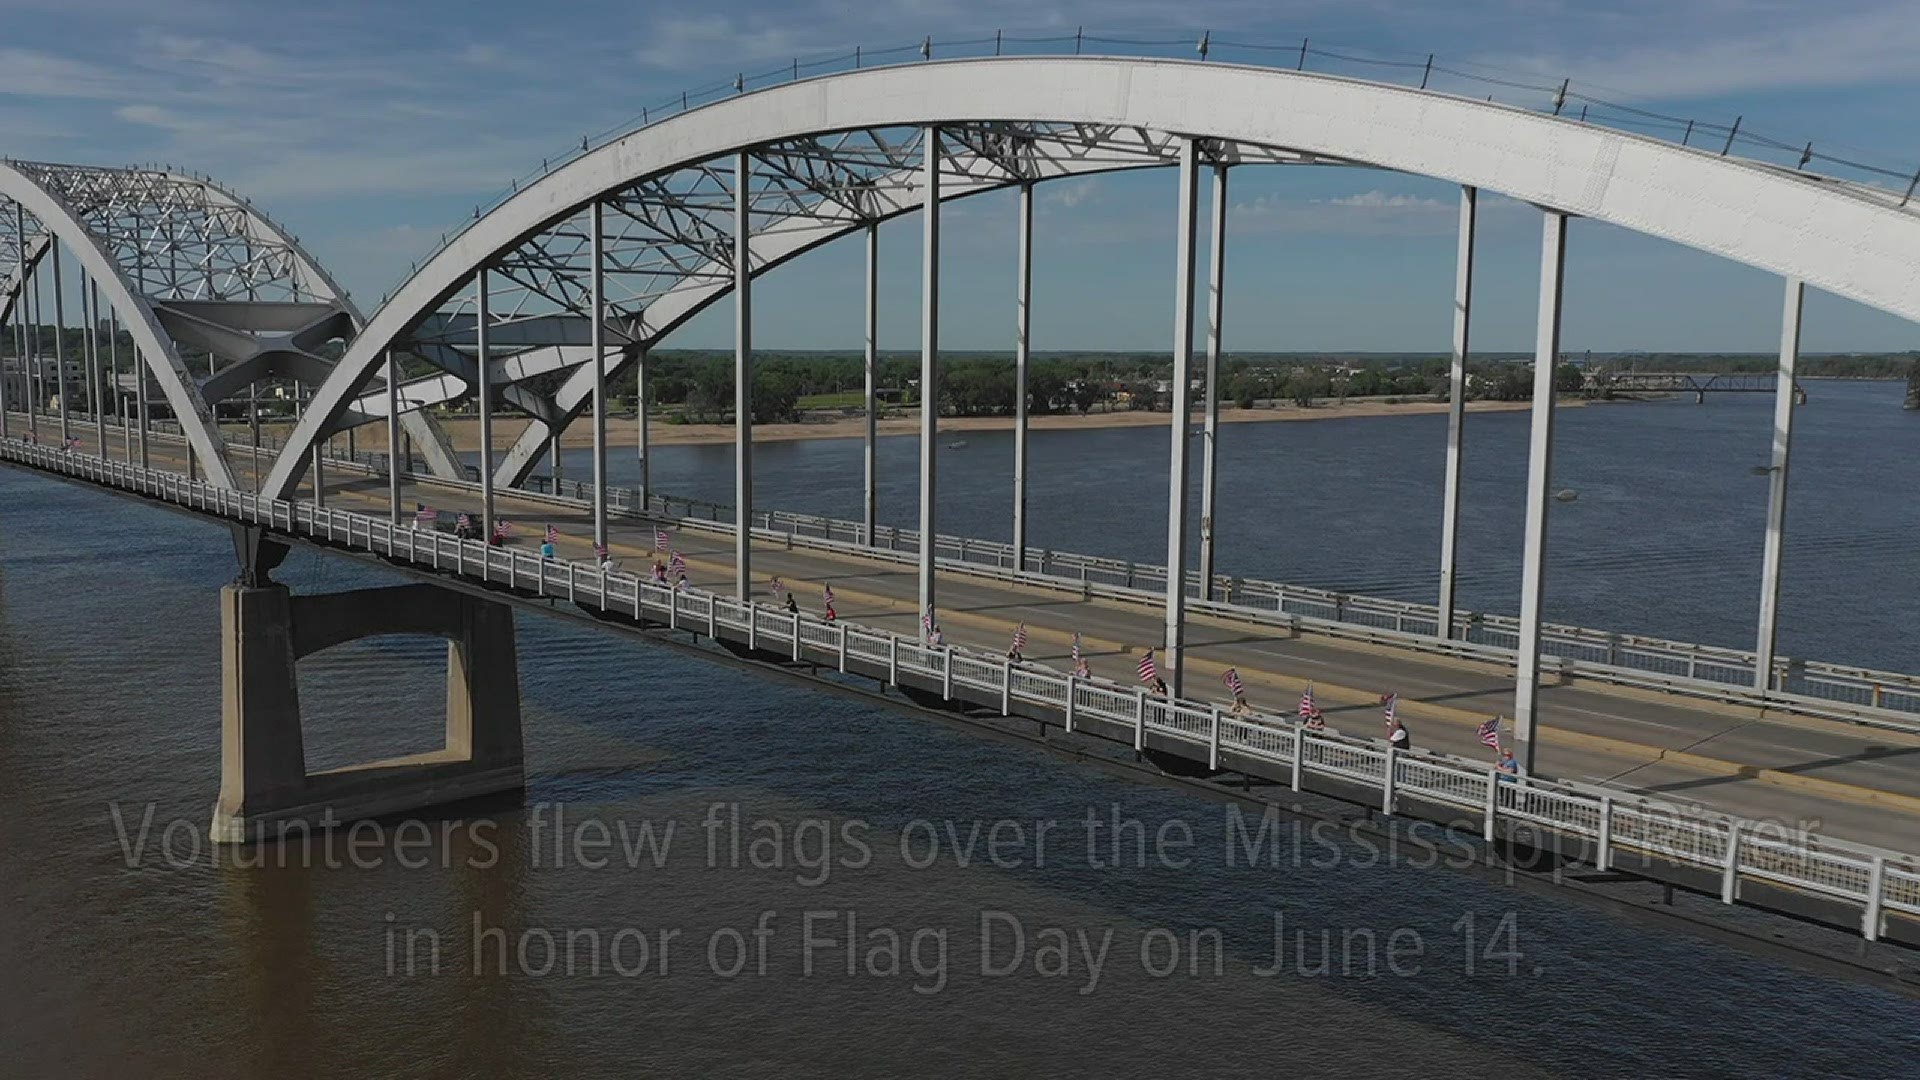 The "Fly the Flag High" event was held to show gratitude and respect for the military and veterans.